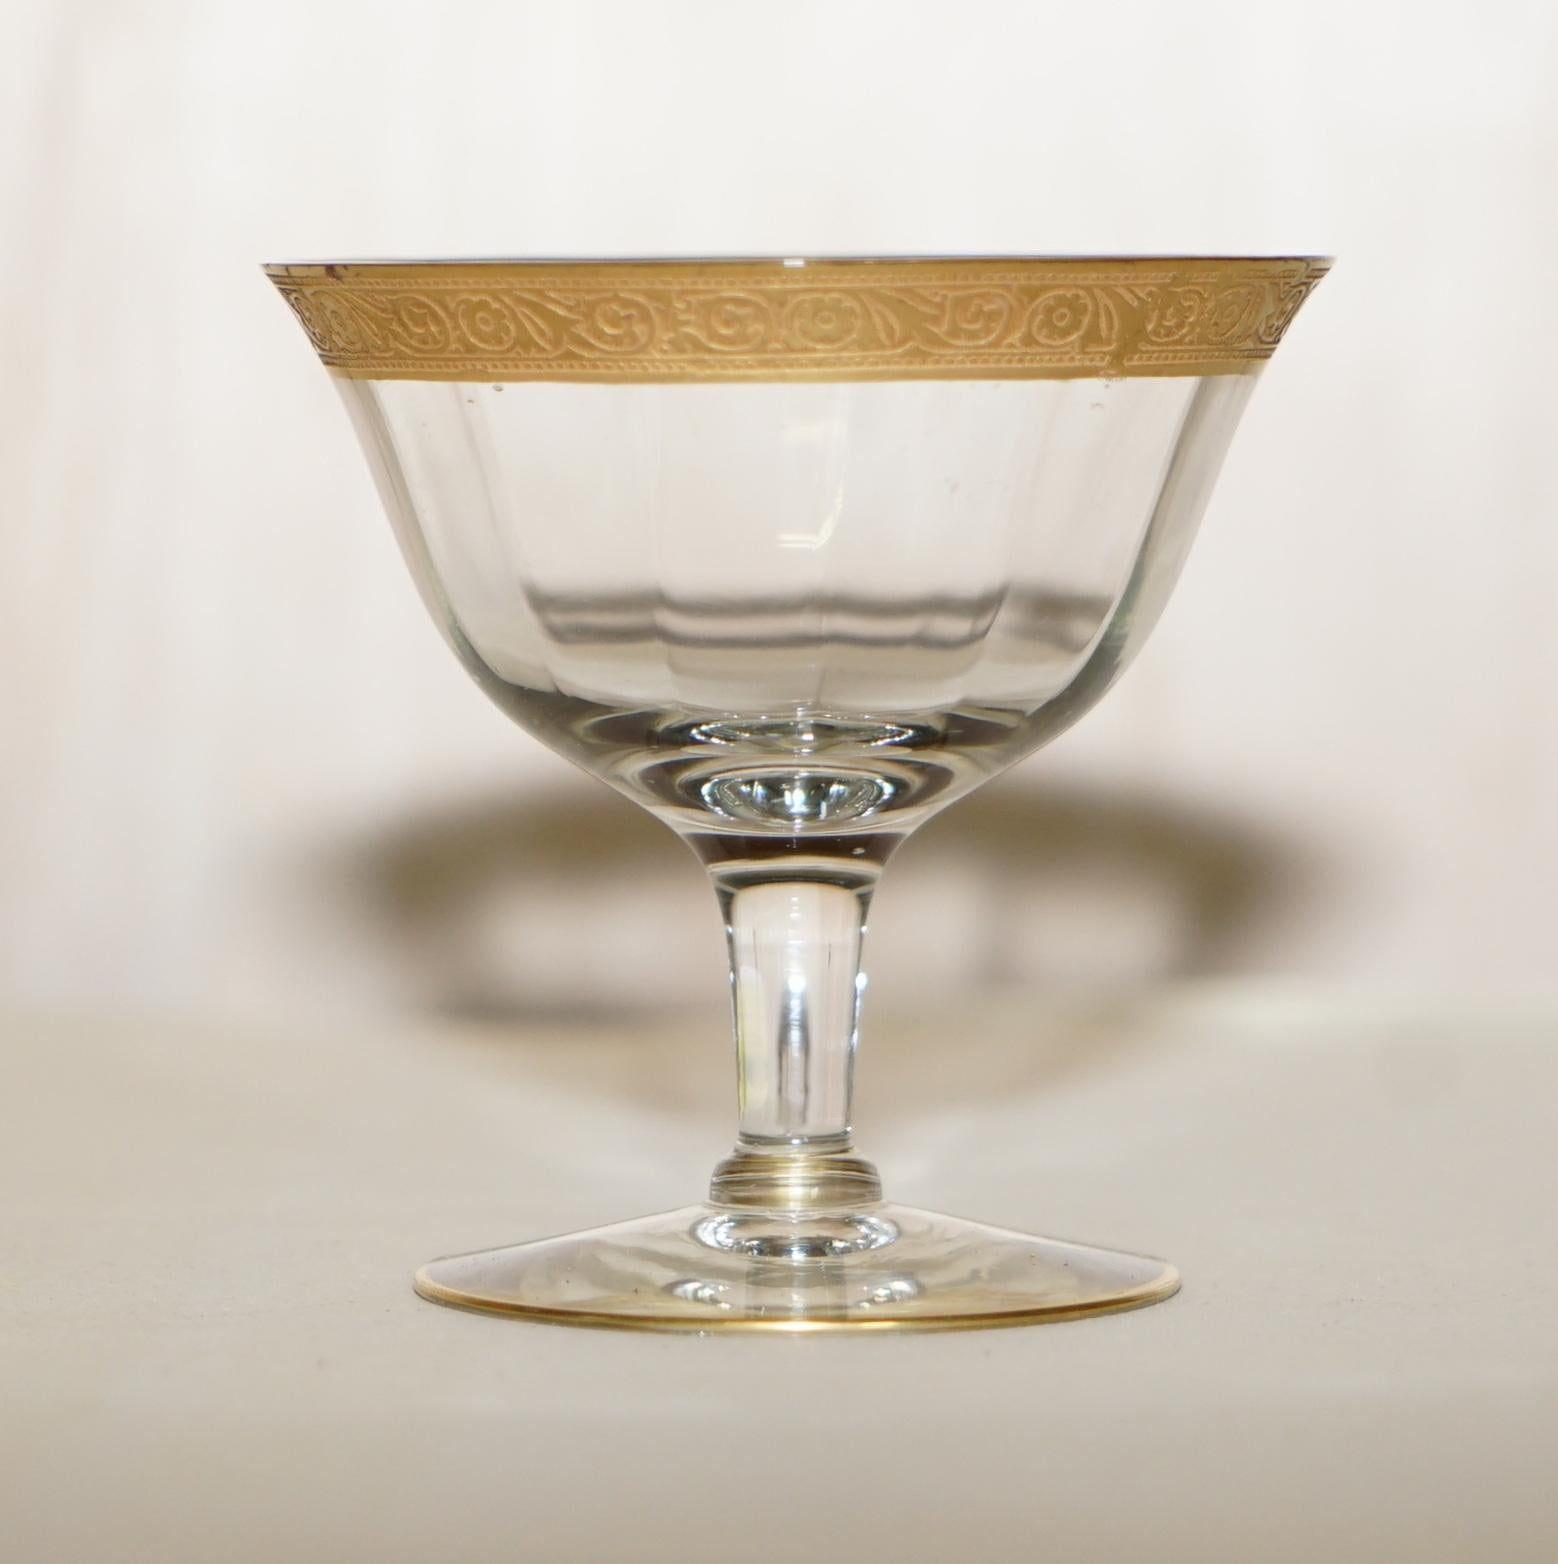 Royal House Antiques

Royal House Antiques is delighted to offer for sale this stunning suite of four Thistle gold Saint Louis style champagne glasses

A good looking well made and decorative set, they look vintage to me circa 1960’s, they have a